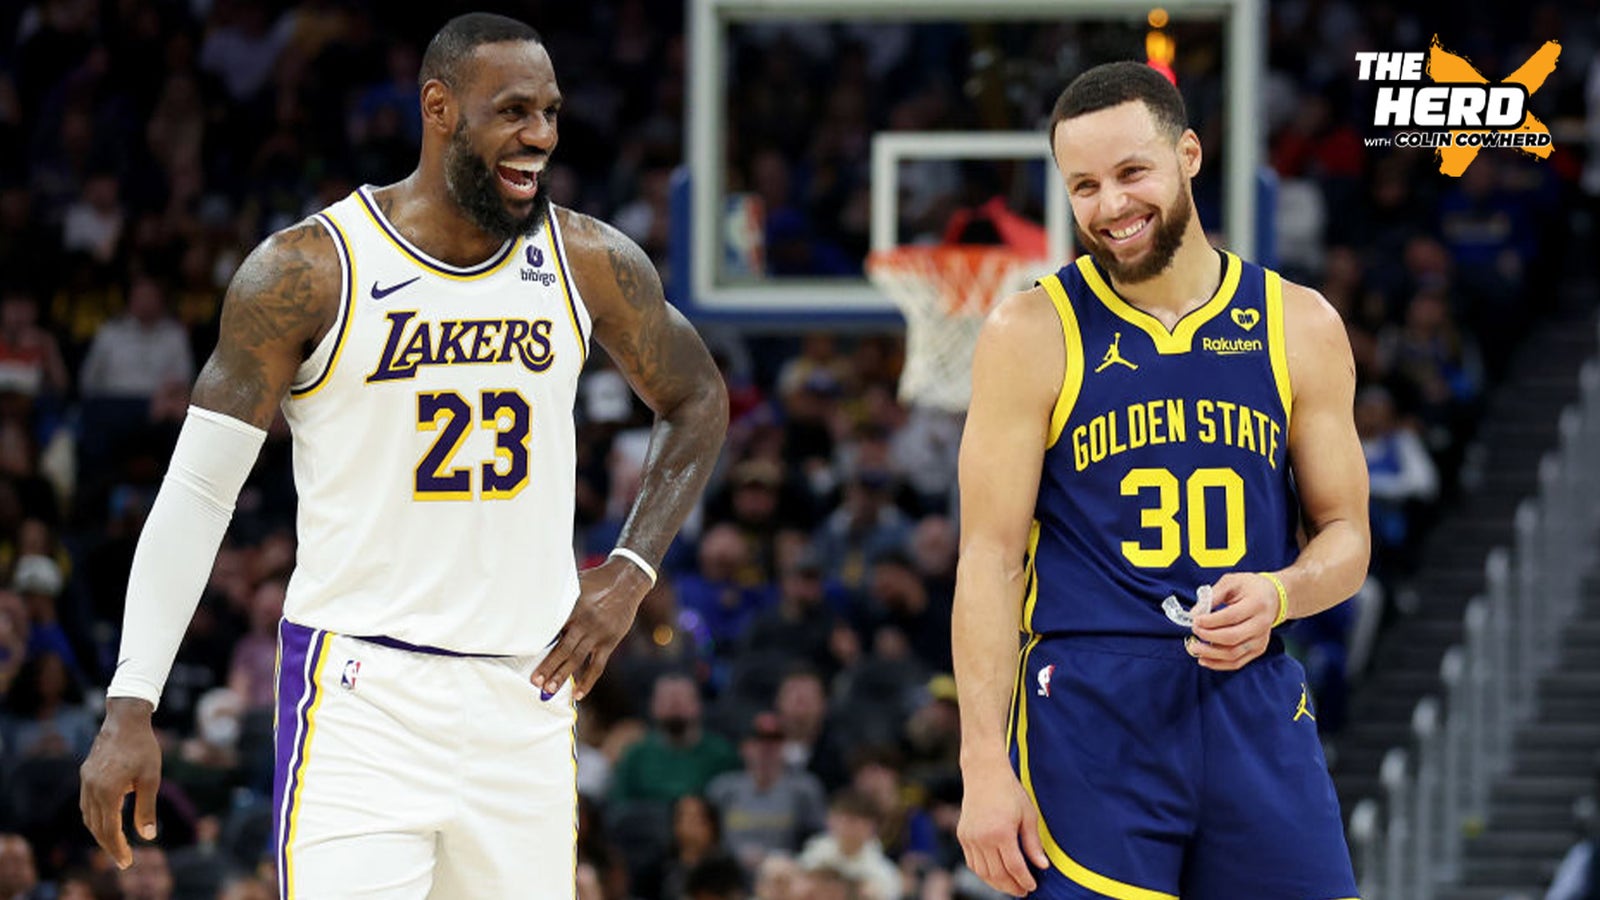 Warriors reportedly attempted to trade for LeBron to join Steph Curry